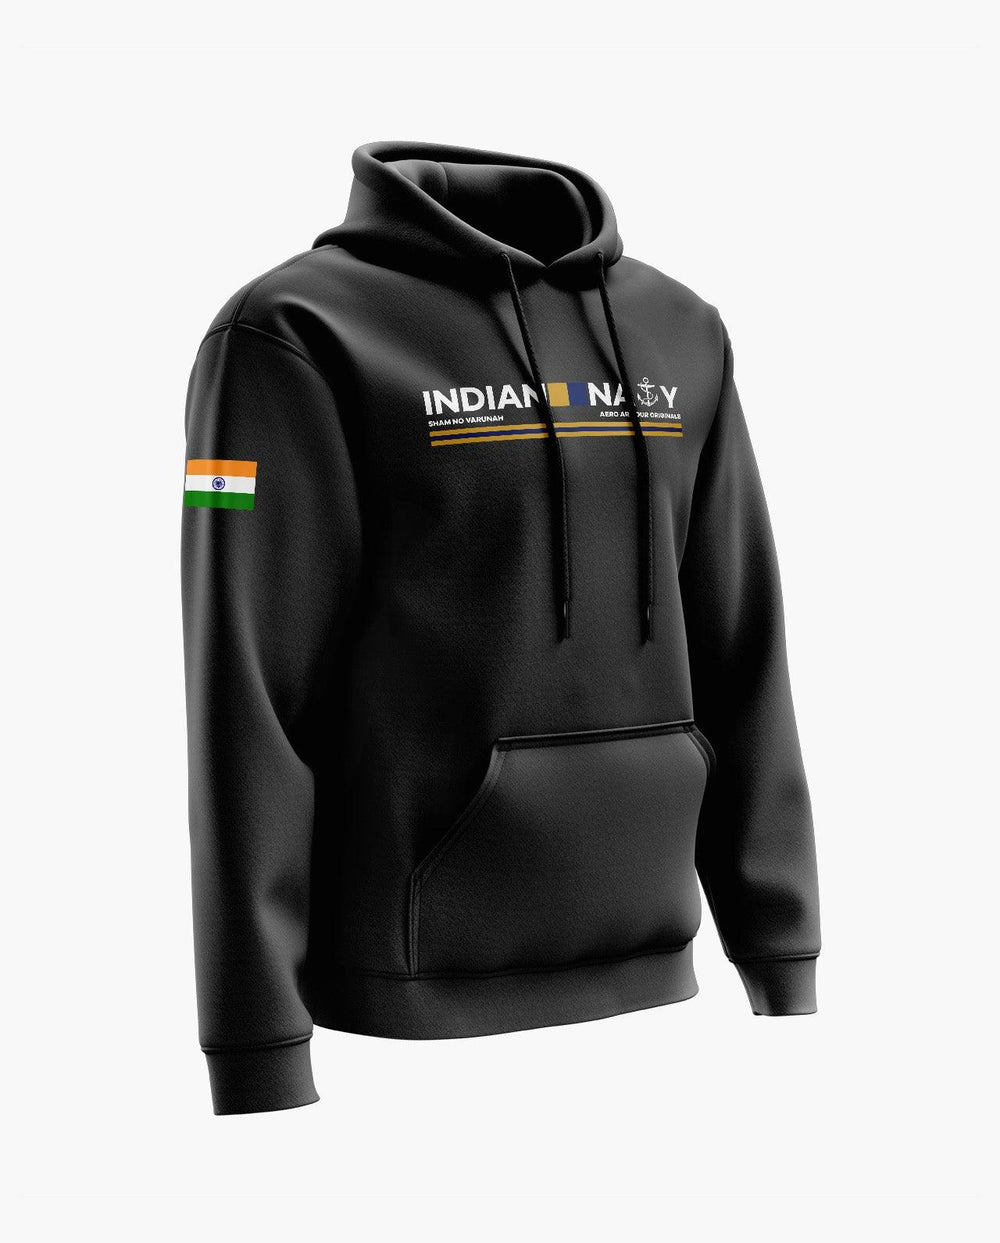 Indian Navy Admiral Hoodie - Aero Armour